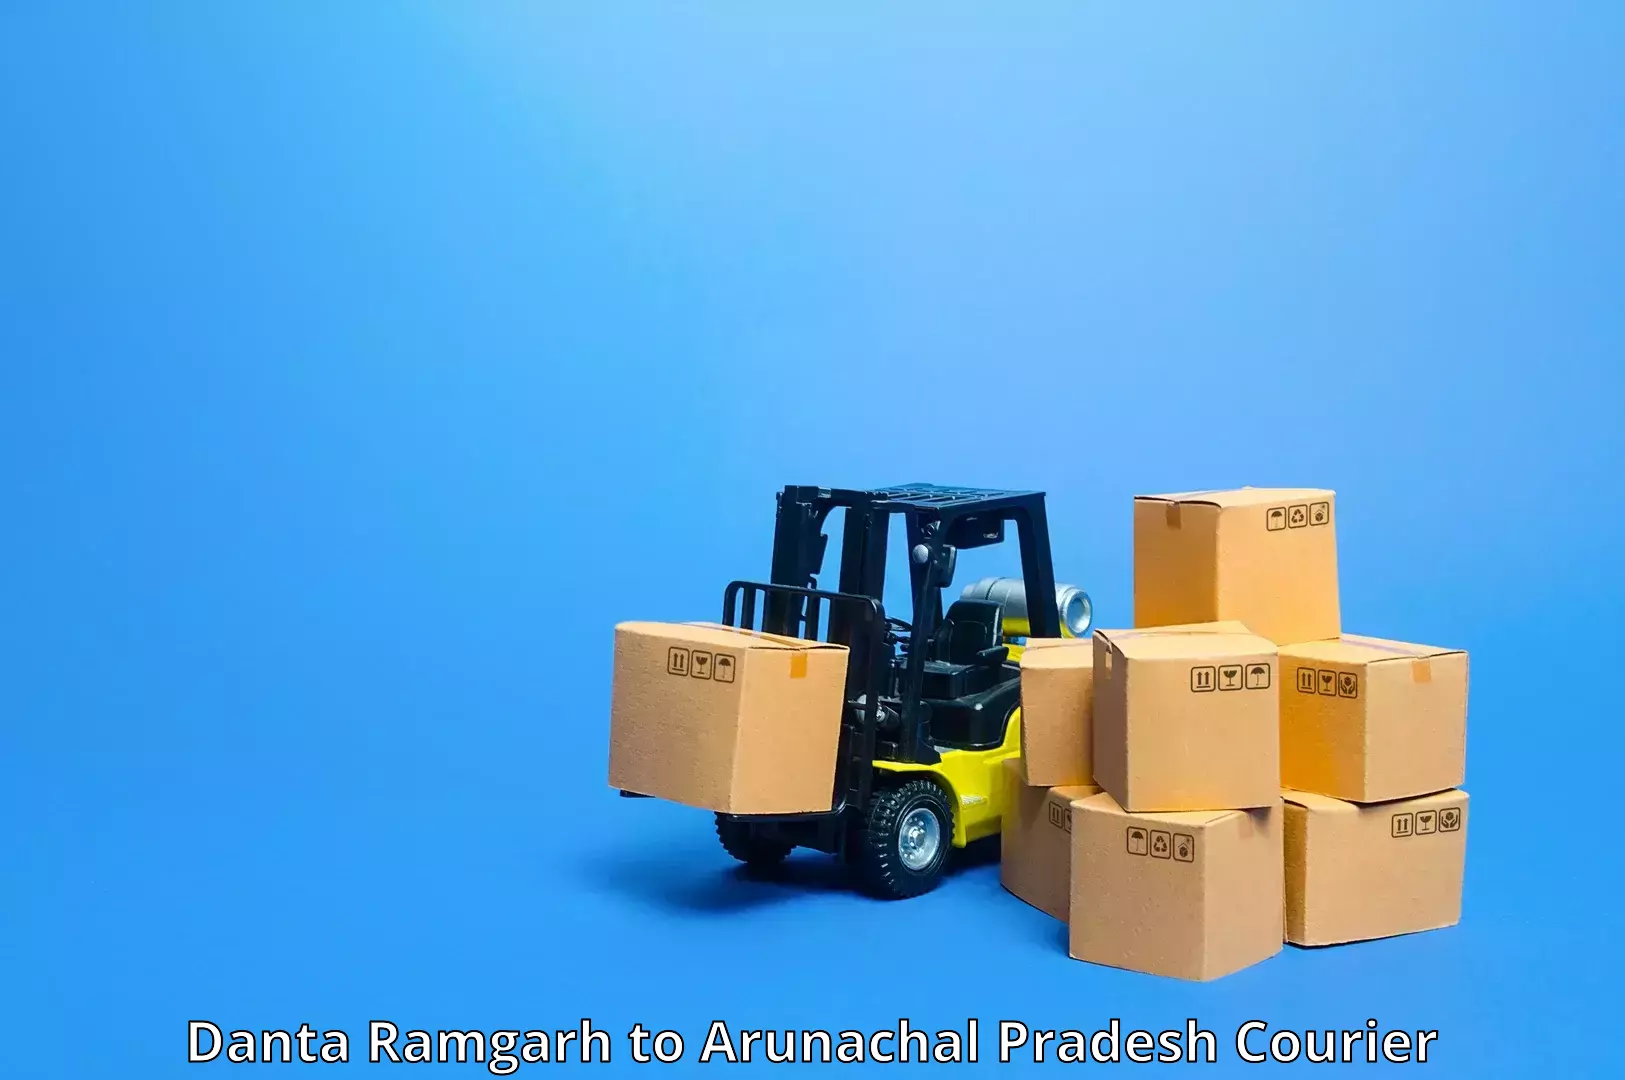 Package delivery network Danta Ramgarh to Lohit